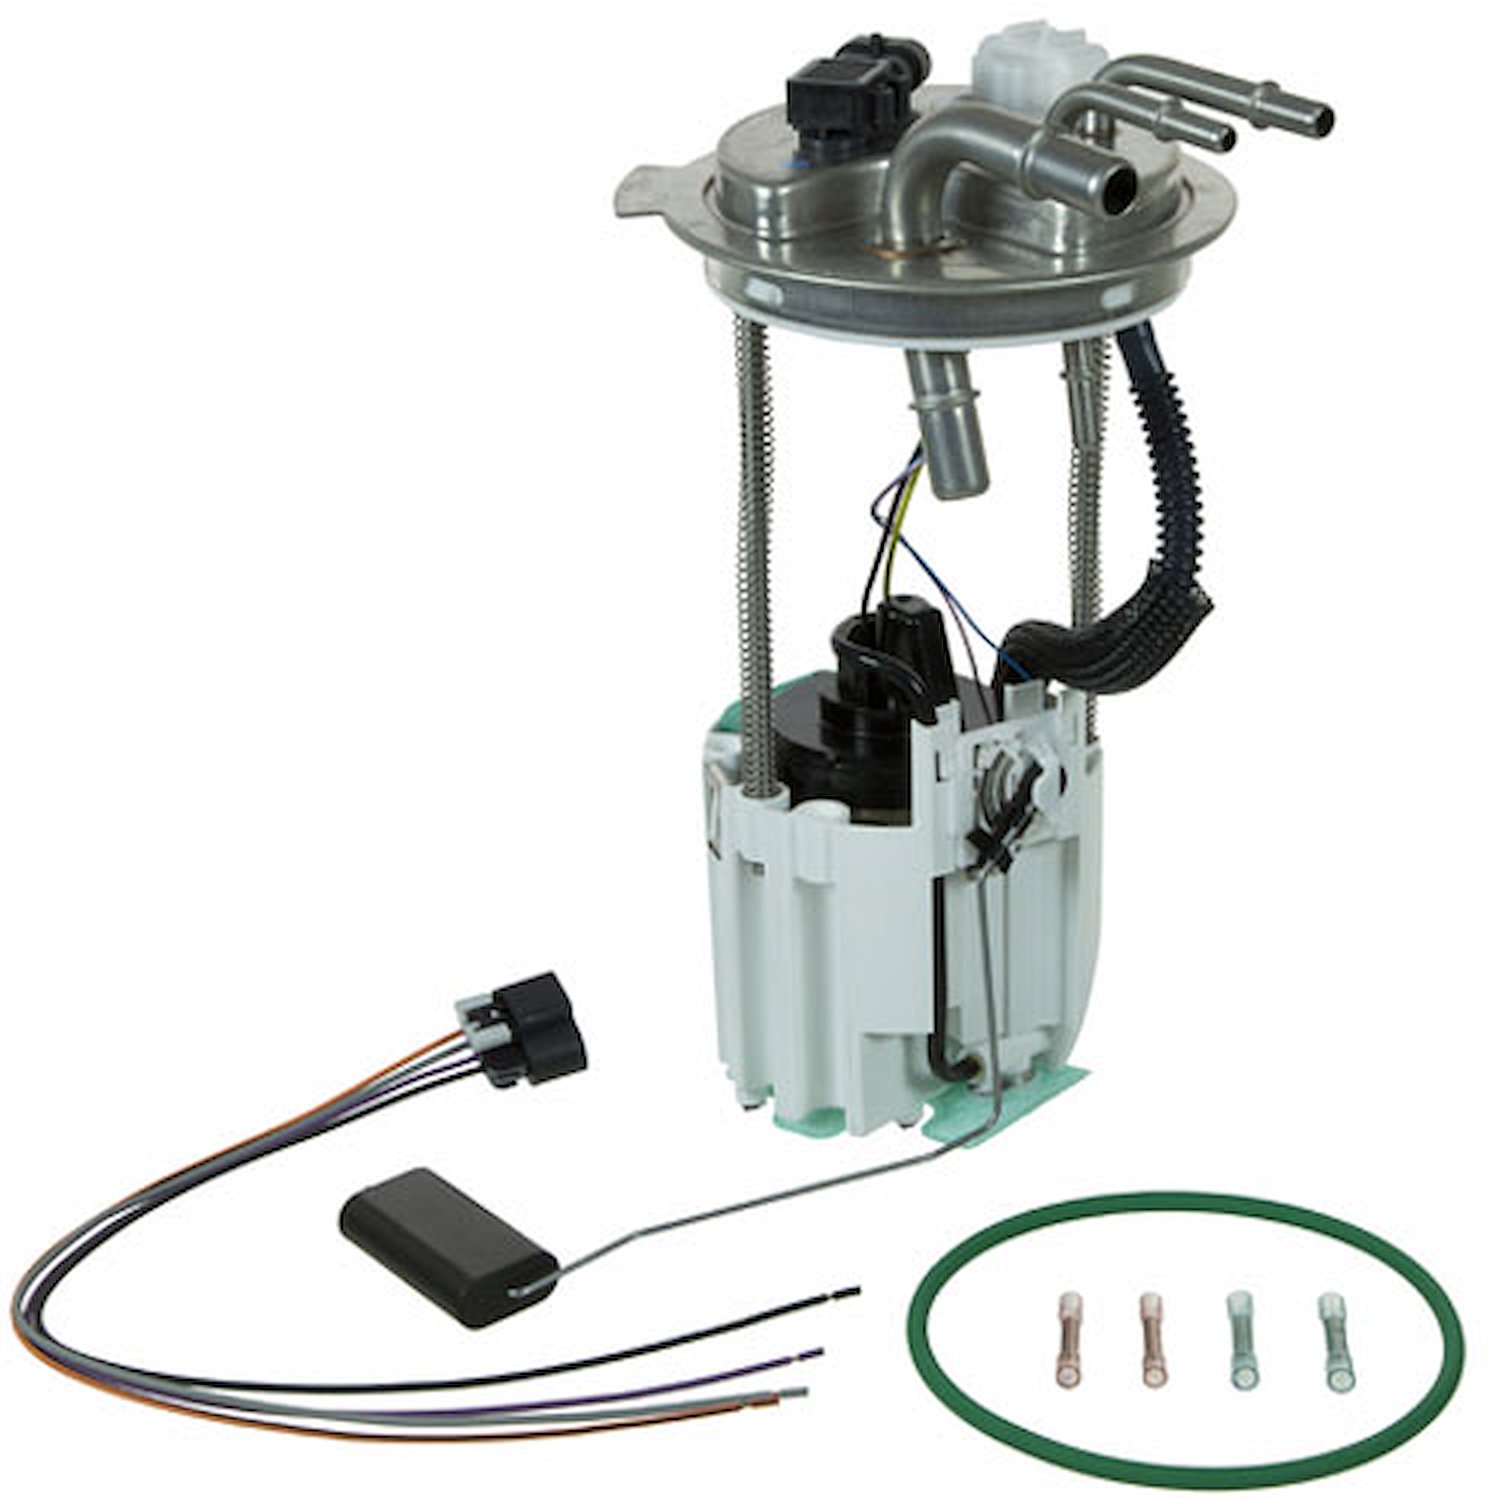 OE GM Replacement Electric Fuel Pump Module Assembly 2004-07 Cadillac Escalade 5.3L/6.0L/6.2L V8